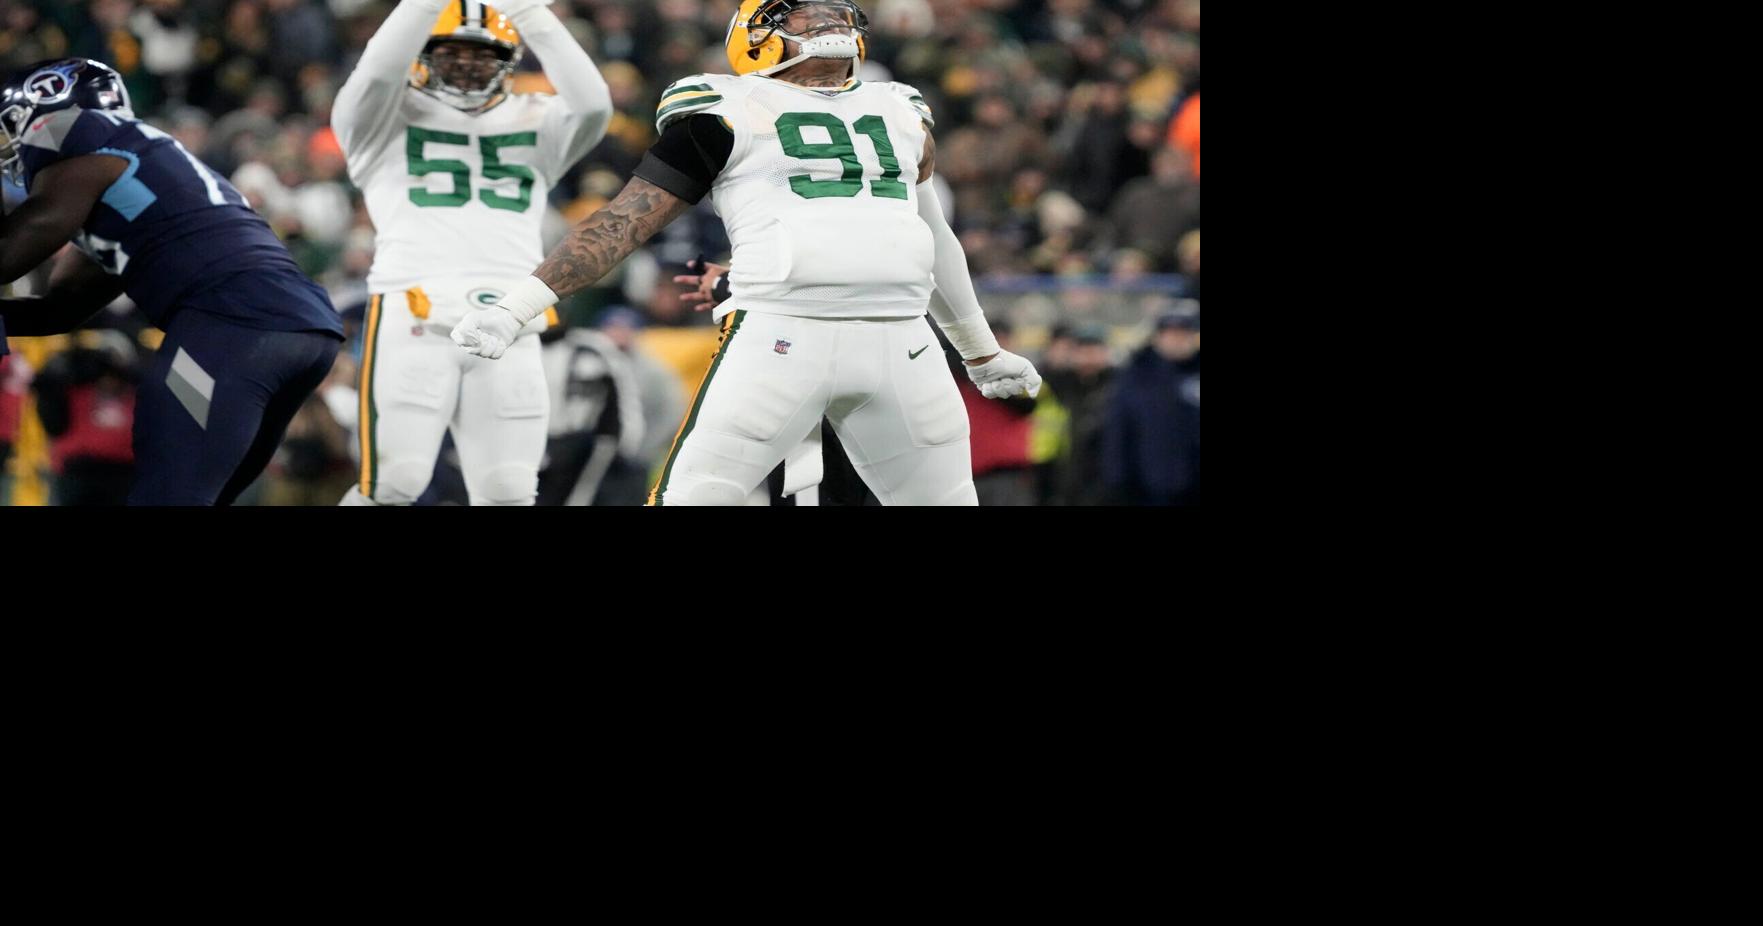 Preston Smith emerges as leader of Packers defense